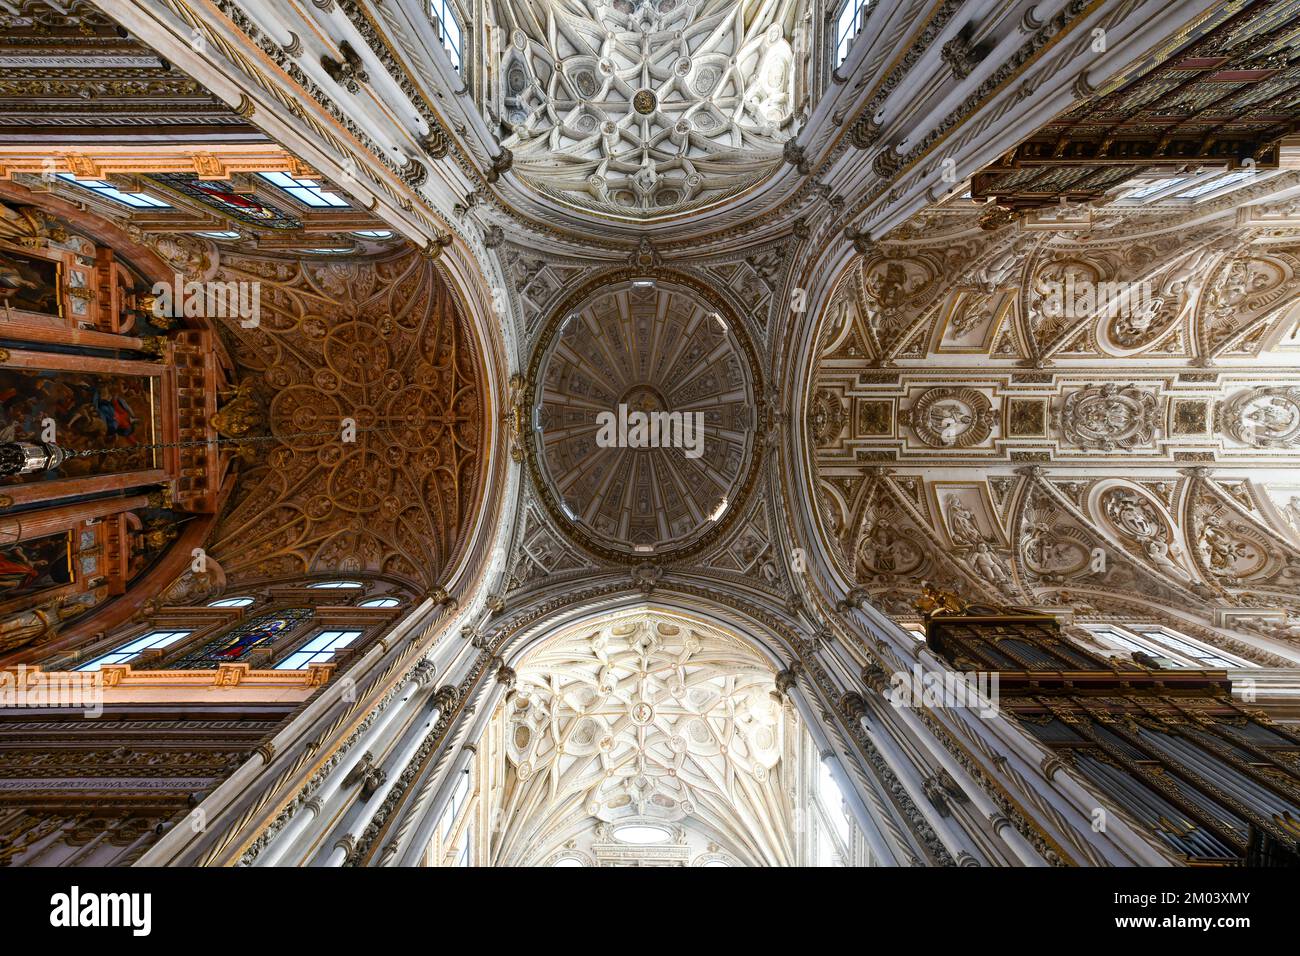 Cordoba, Spain - Nov 28, 2021: Cathedral Mosque of Cordoba, Spain. the Great Mosque of Cordoba is one of the oldest structures still standing from the Stock Photo